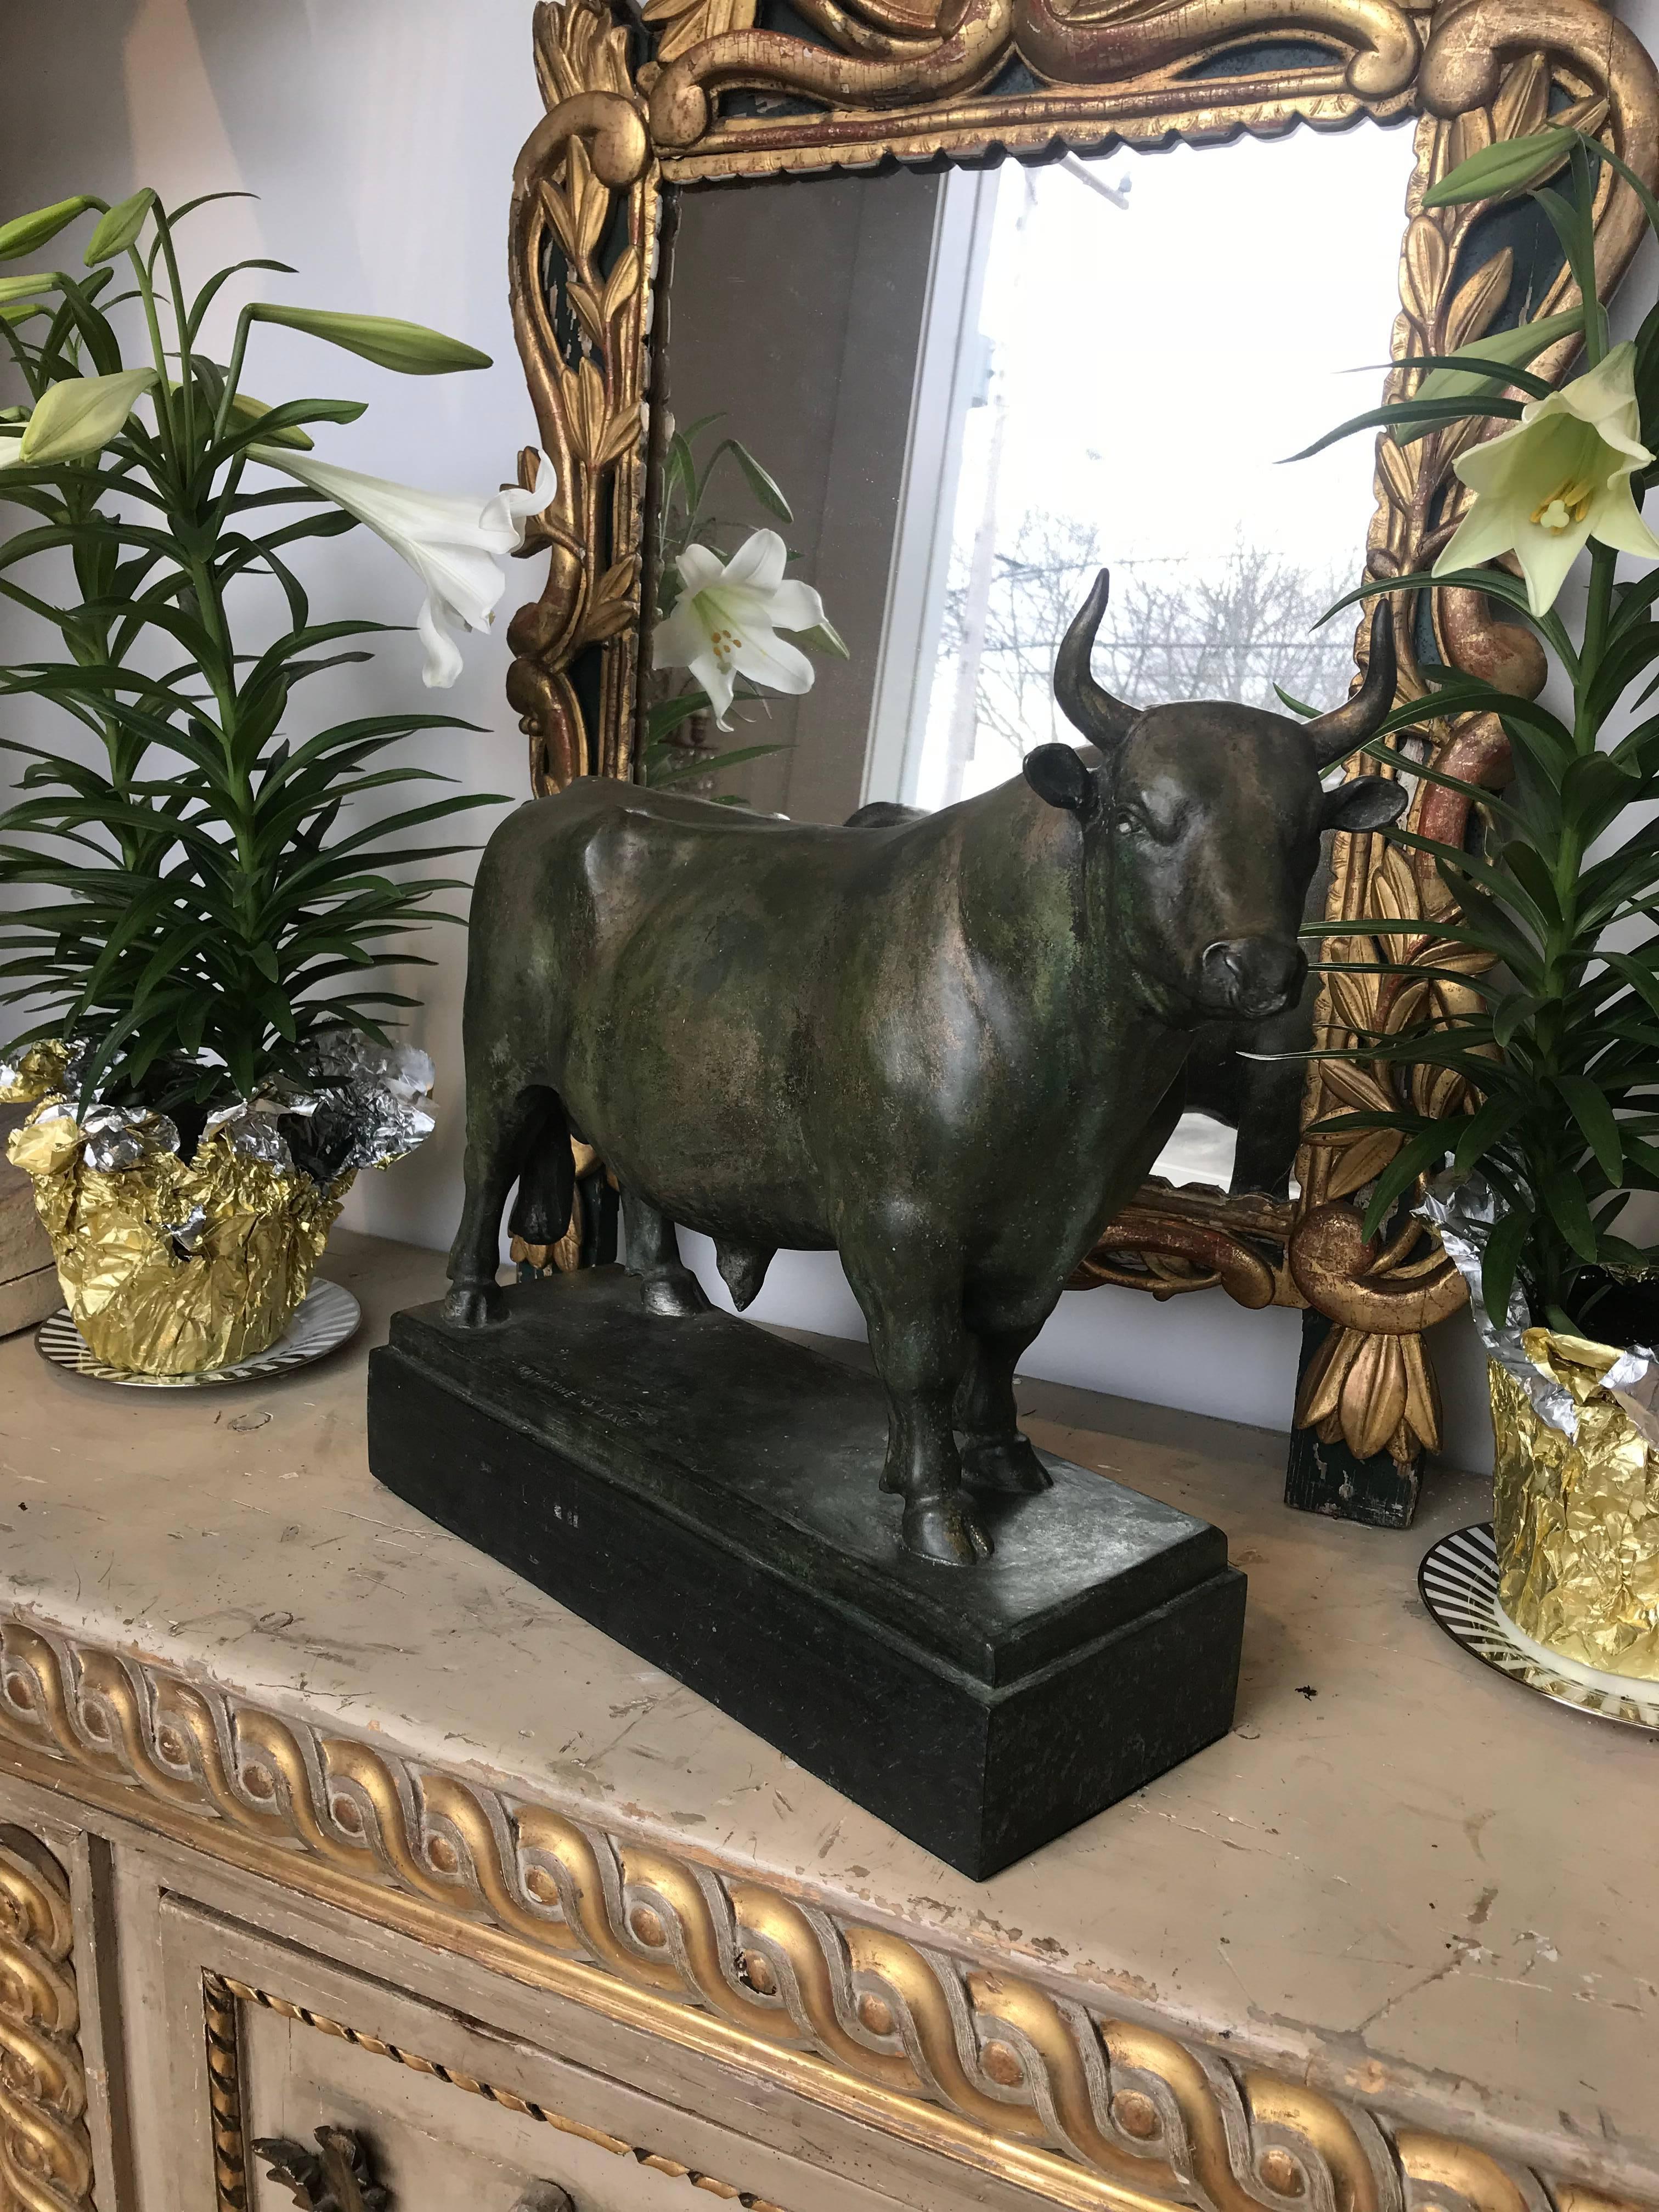 Rare Katharine Lane Weems Patinated Bronze Sculpture of a Bull

Katharine Lane Weems (born Katharine Ward Lane, February 22, 1899 - 1989) was an American sculptor famous for her realistic portrayals of animals.

--Signed 